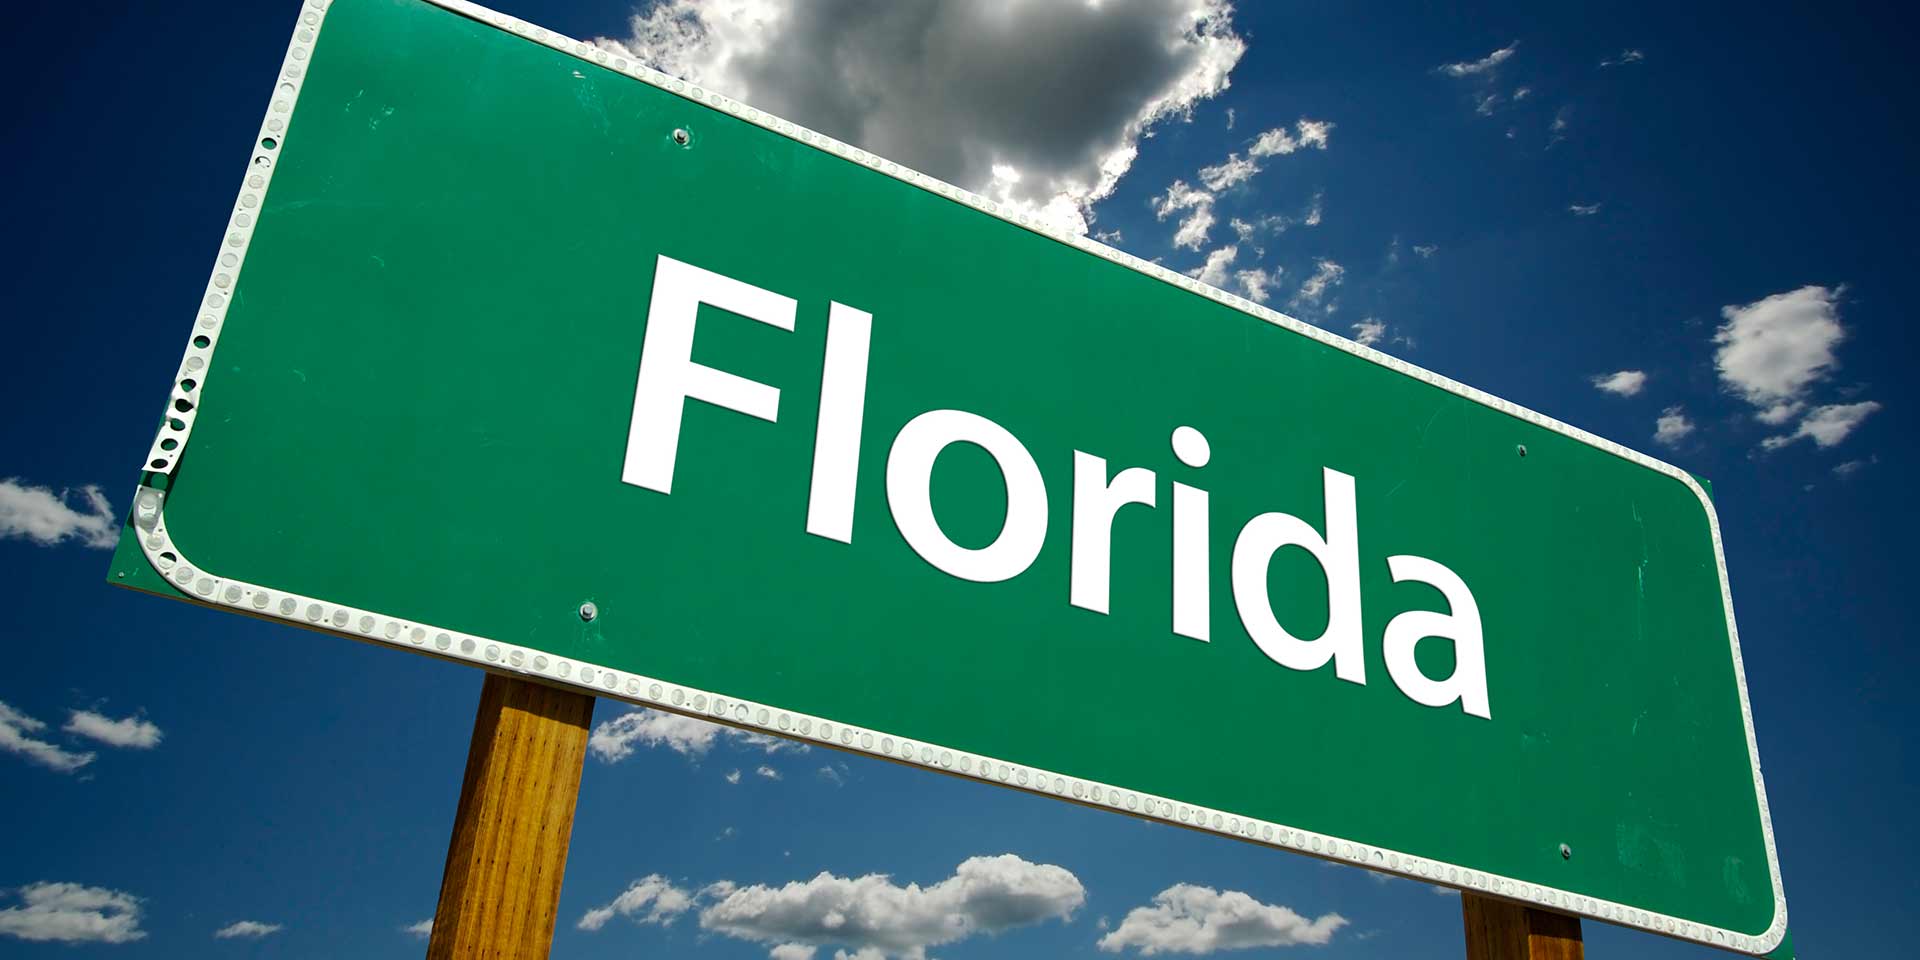 florida is the destination as the best place to live